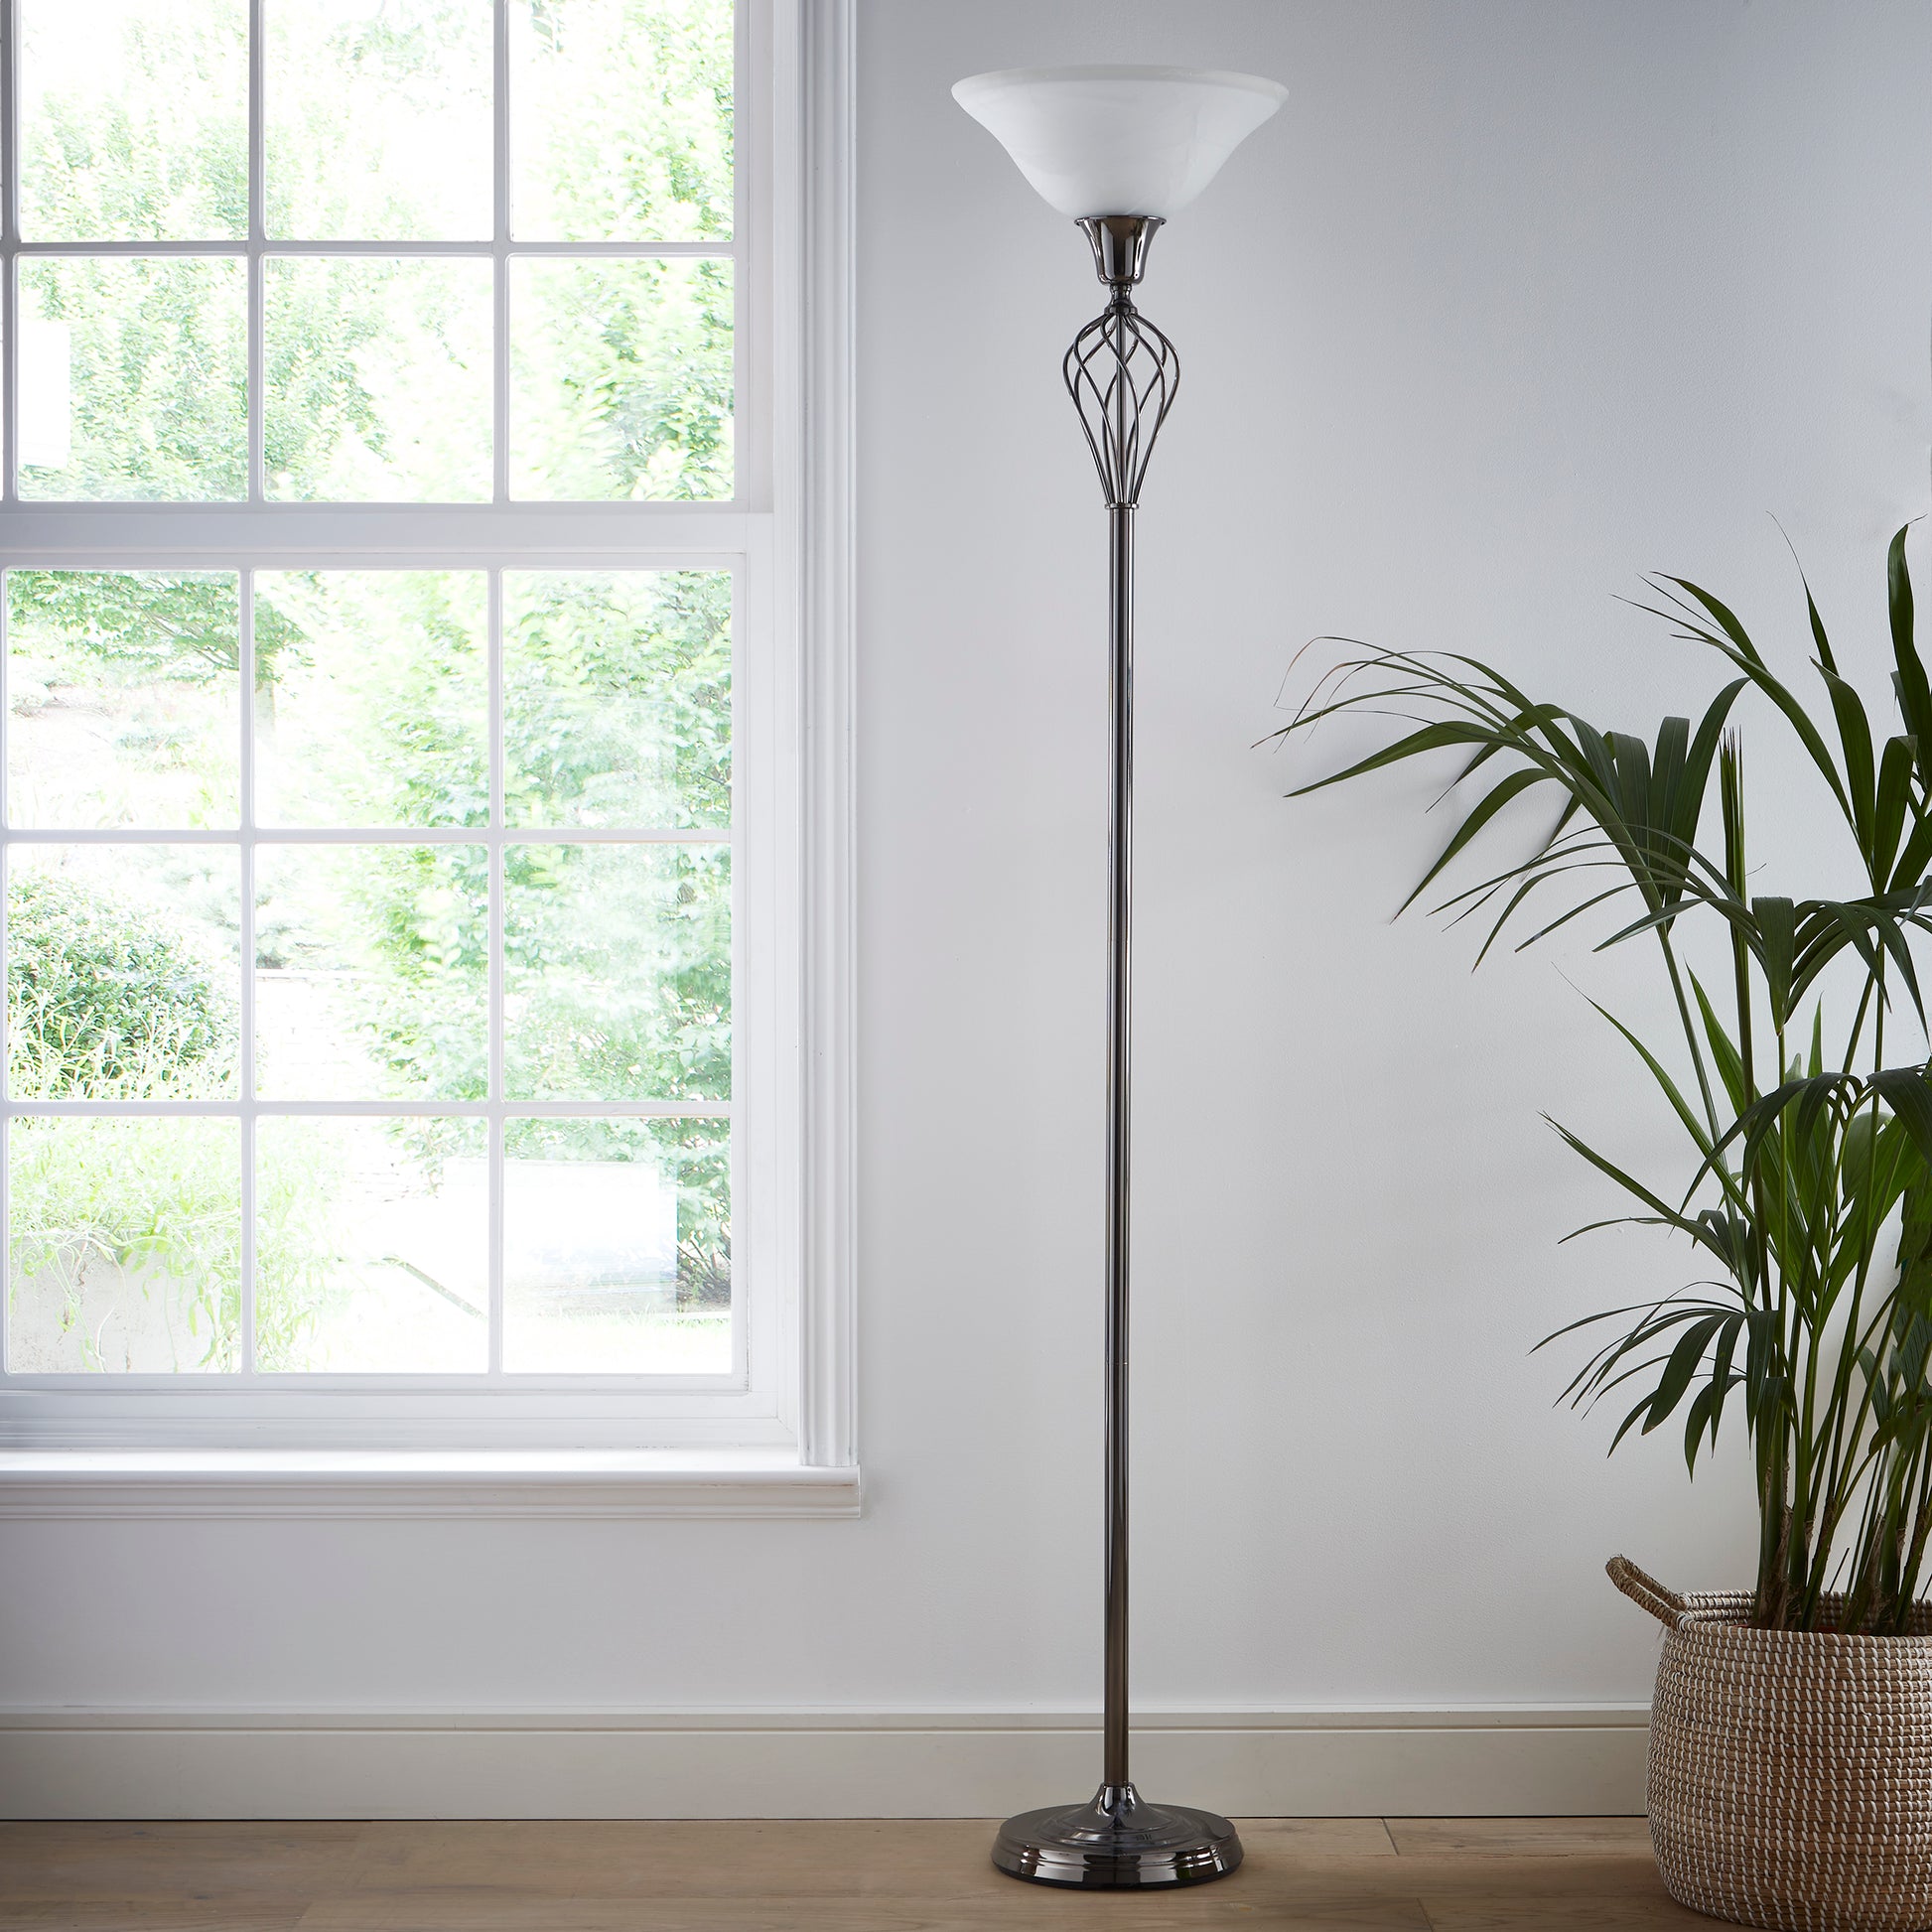 Traditional Barley Twist Floor Lamp up lighter in Black Chrome finish with shade